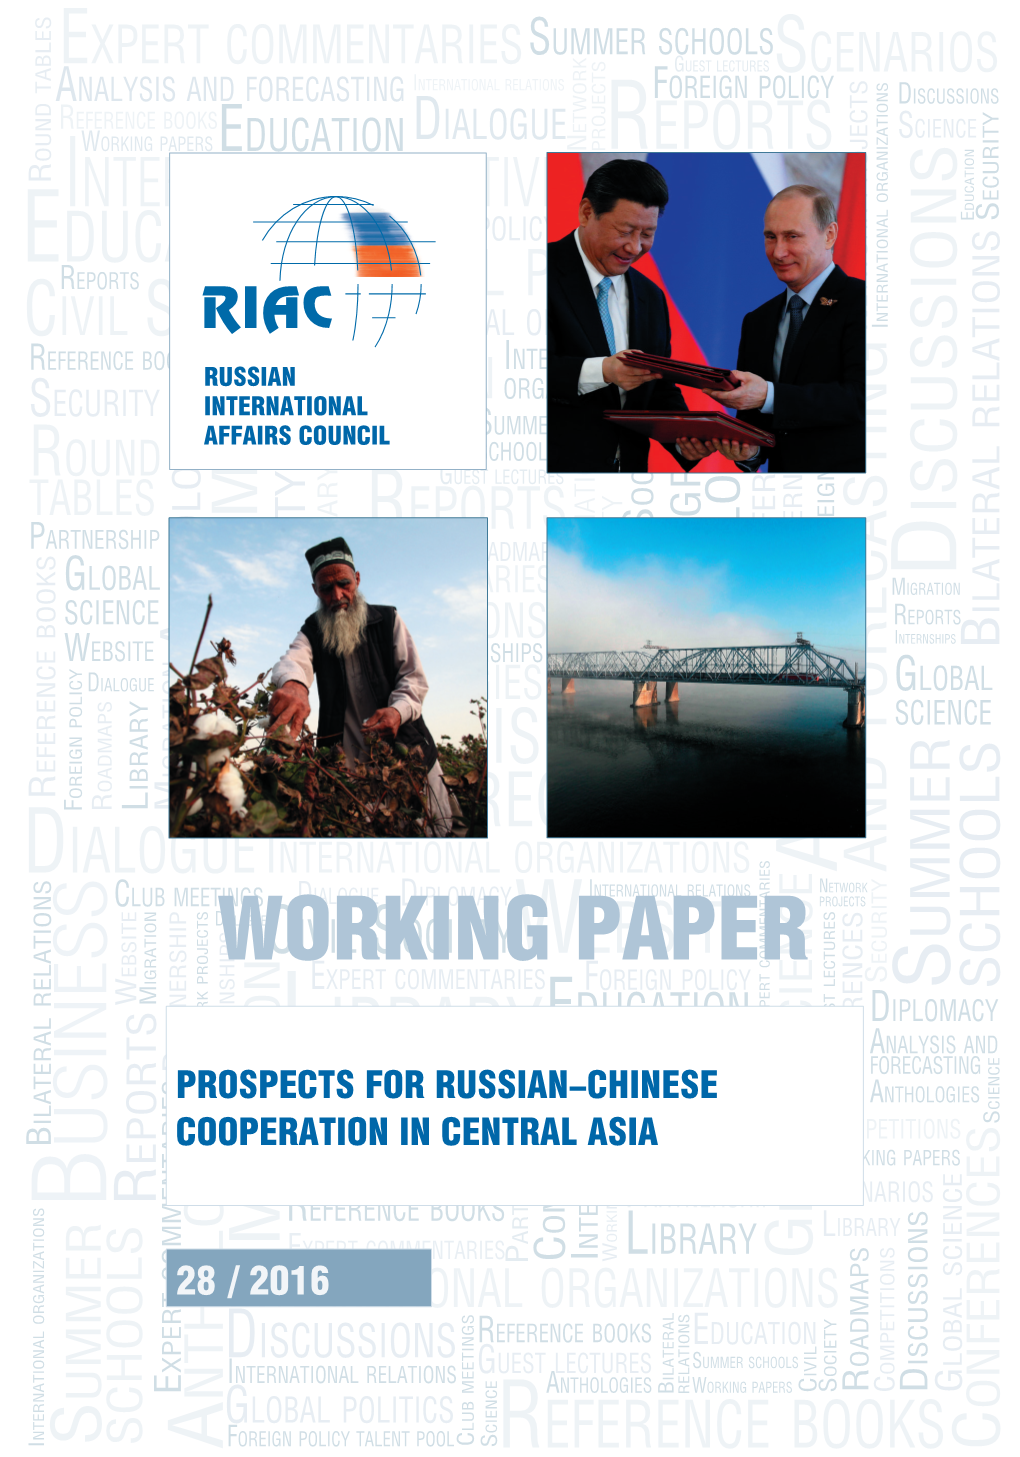 Prospects for Russian-Chinese Cooperation in Central Asia